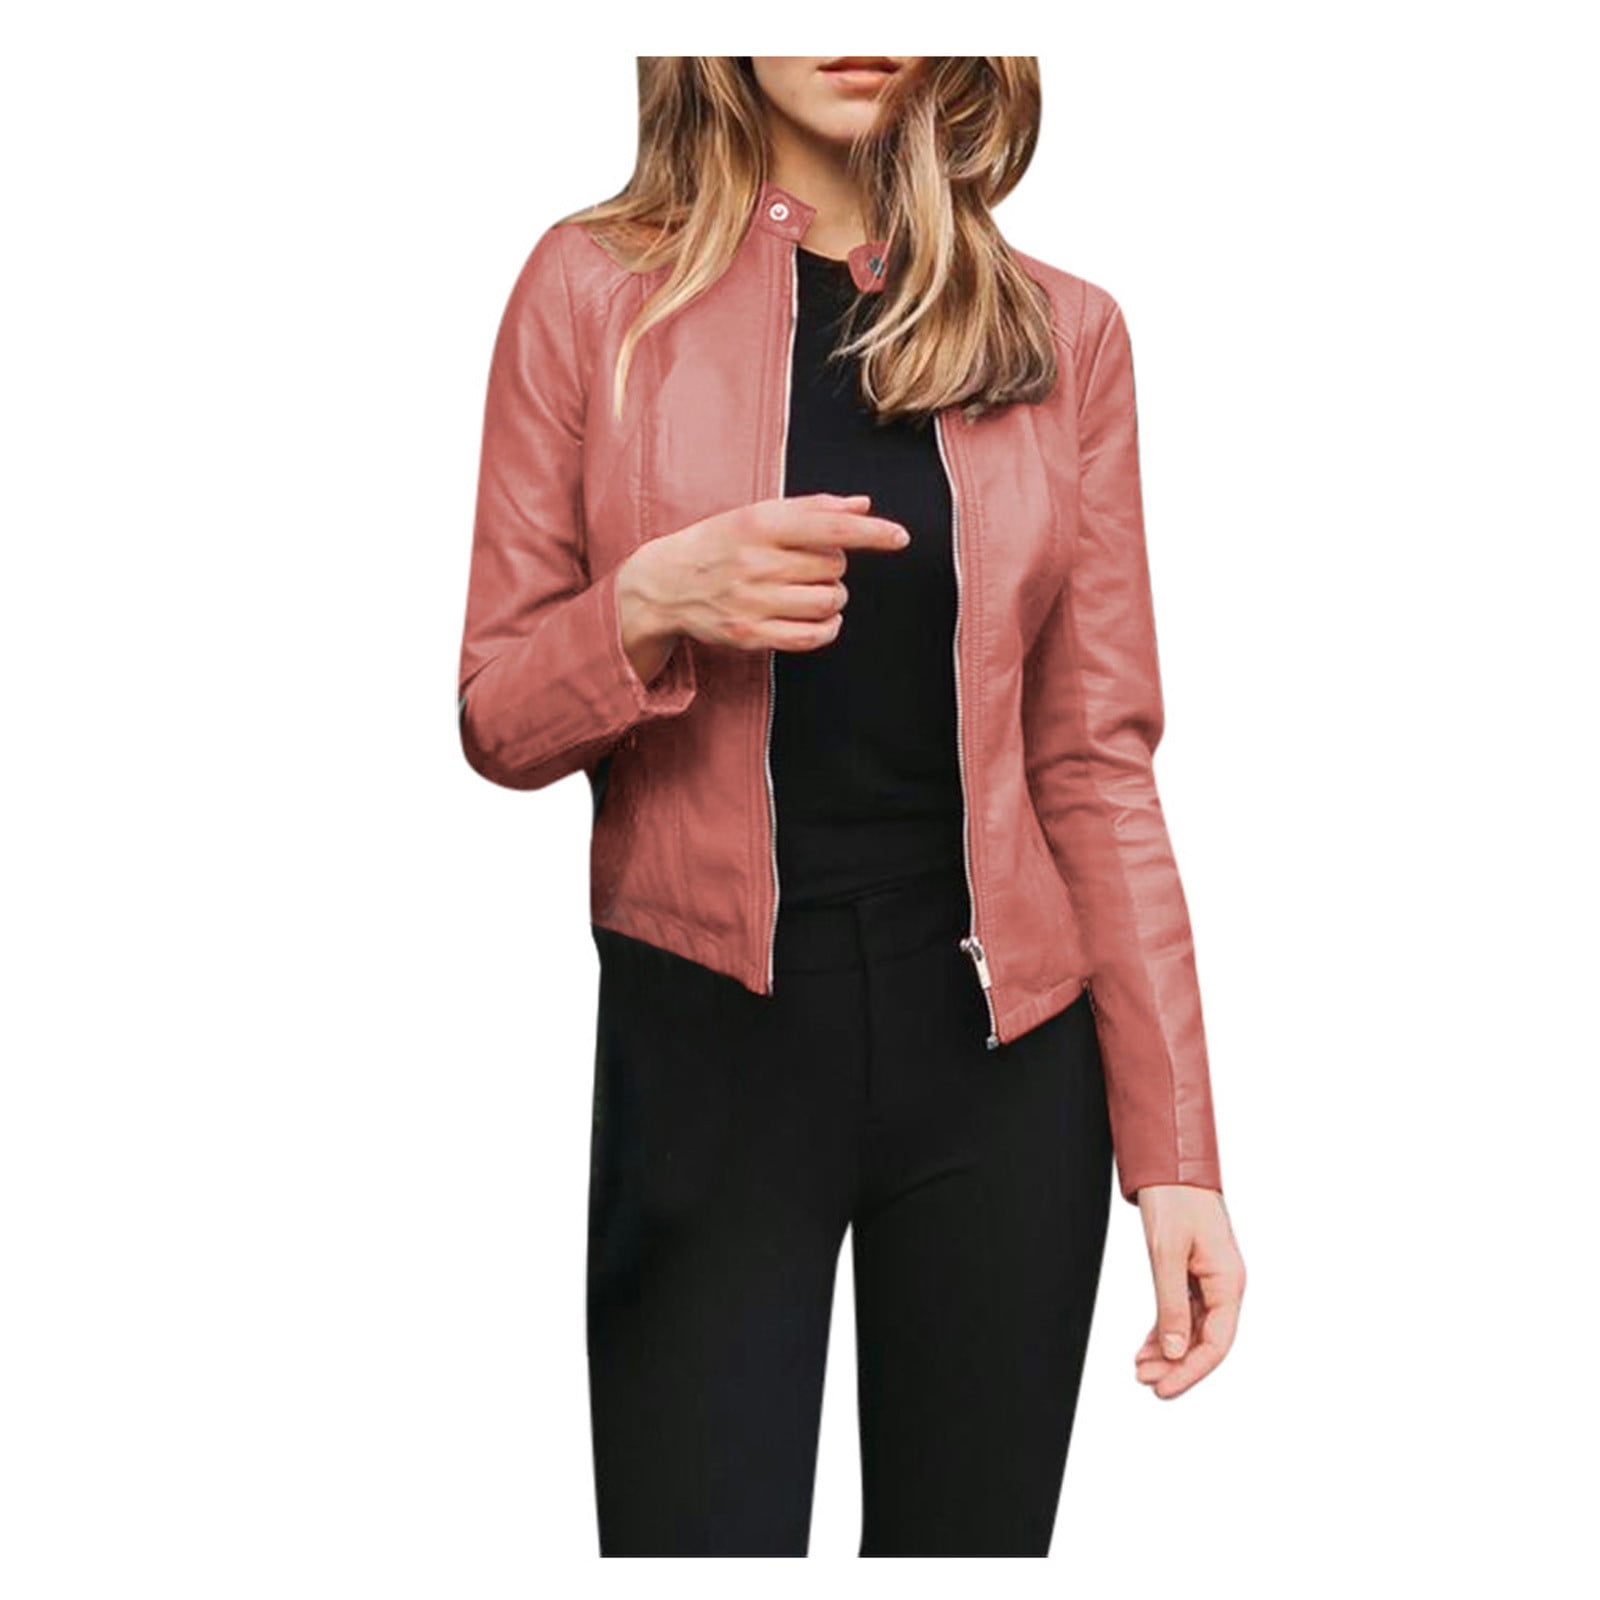 Leather Jackets Clearance Women - Leather Jackets Sale - Up to 70% Discount